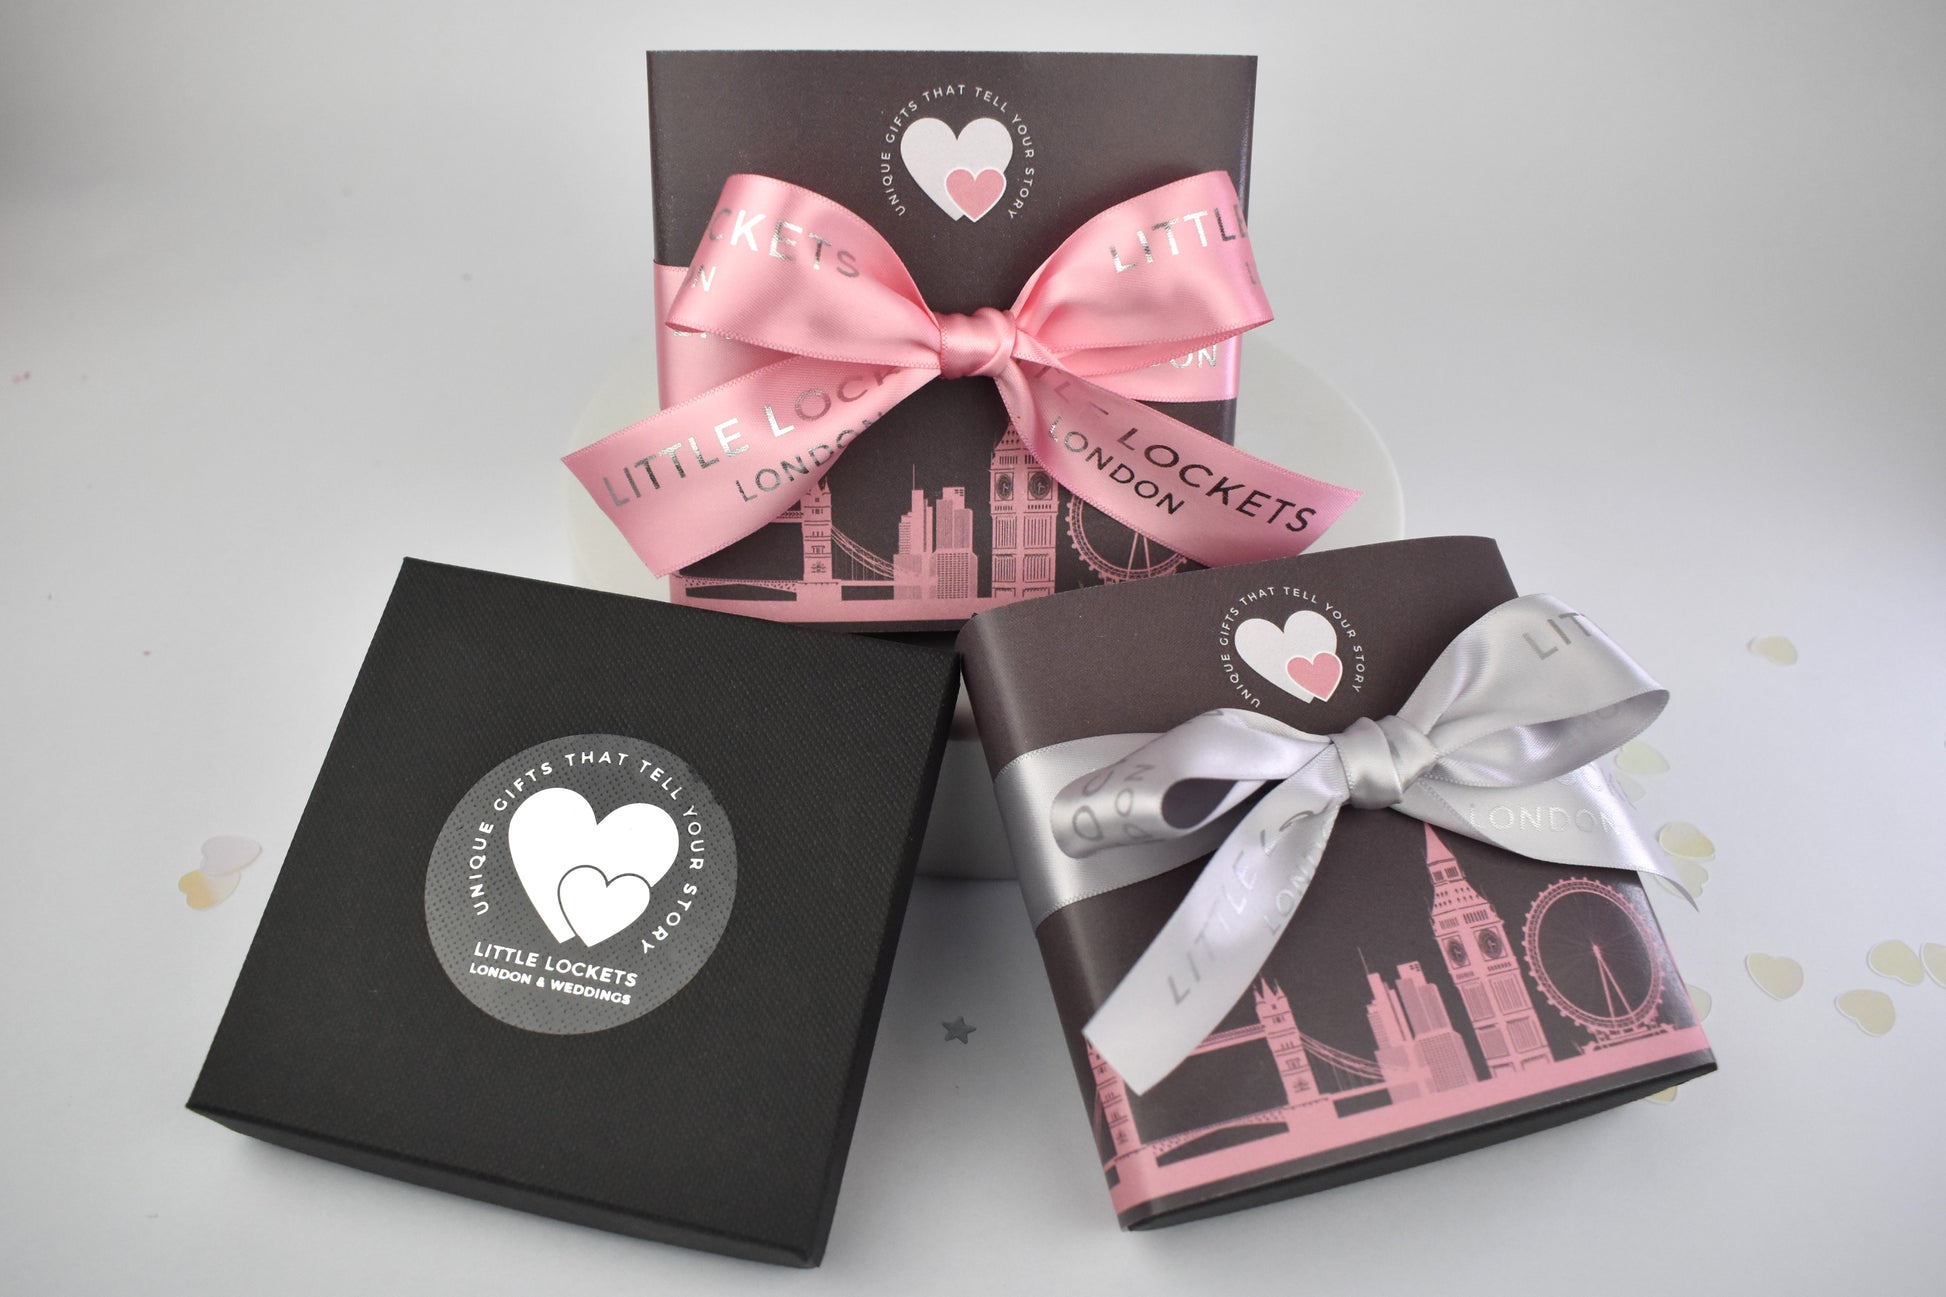 Your choice of gift wrap - free branded gift box or upgrade to a London skyline wrap and ribbon tie